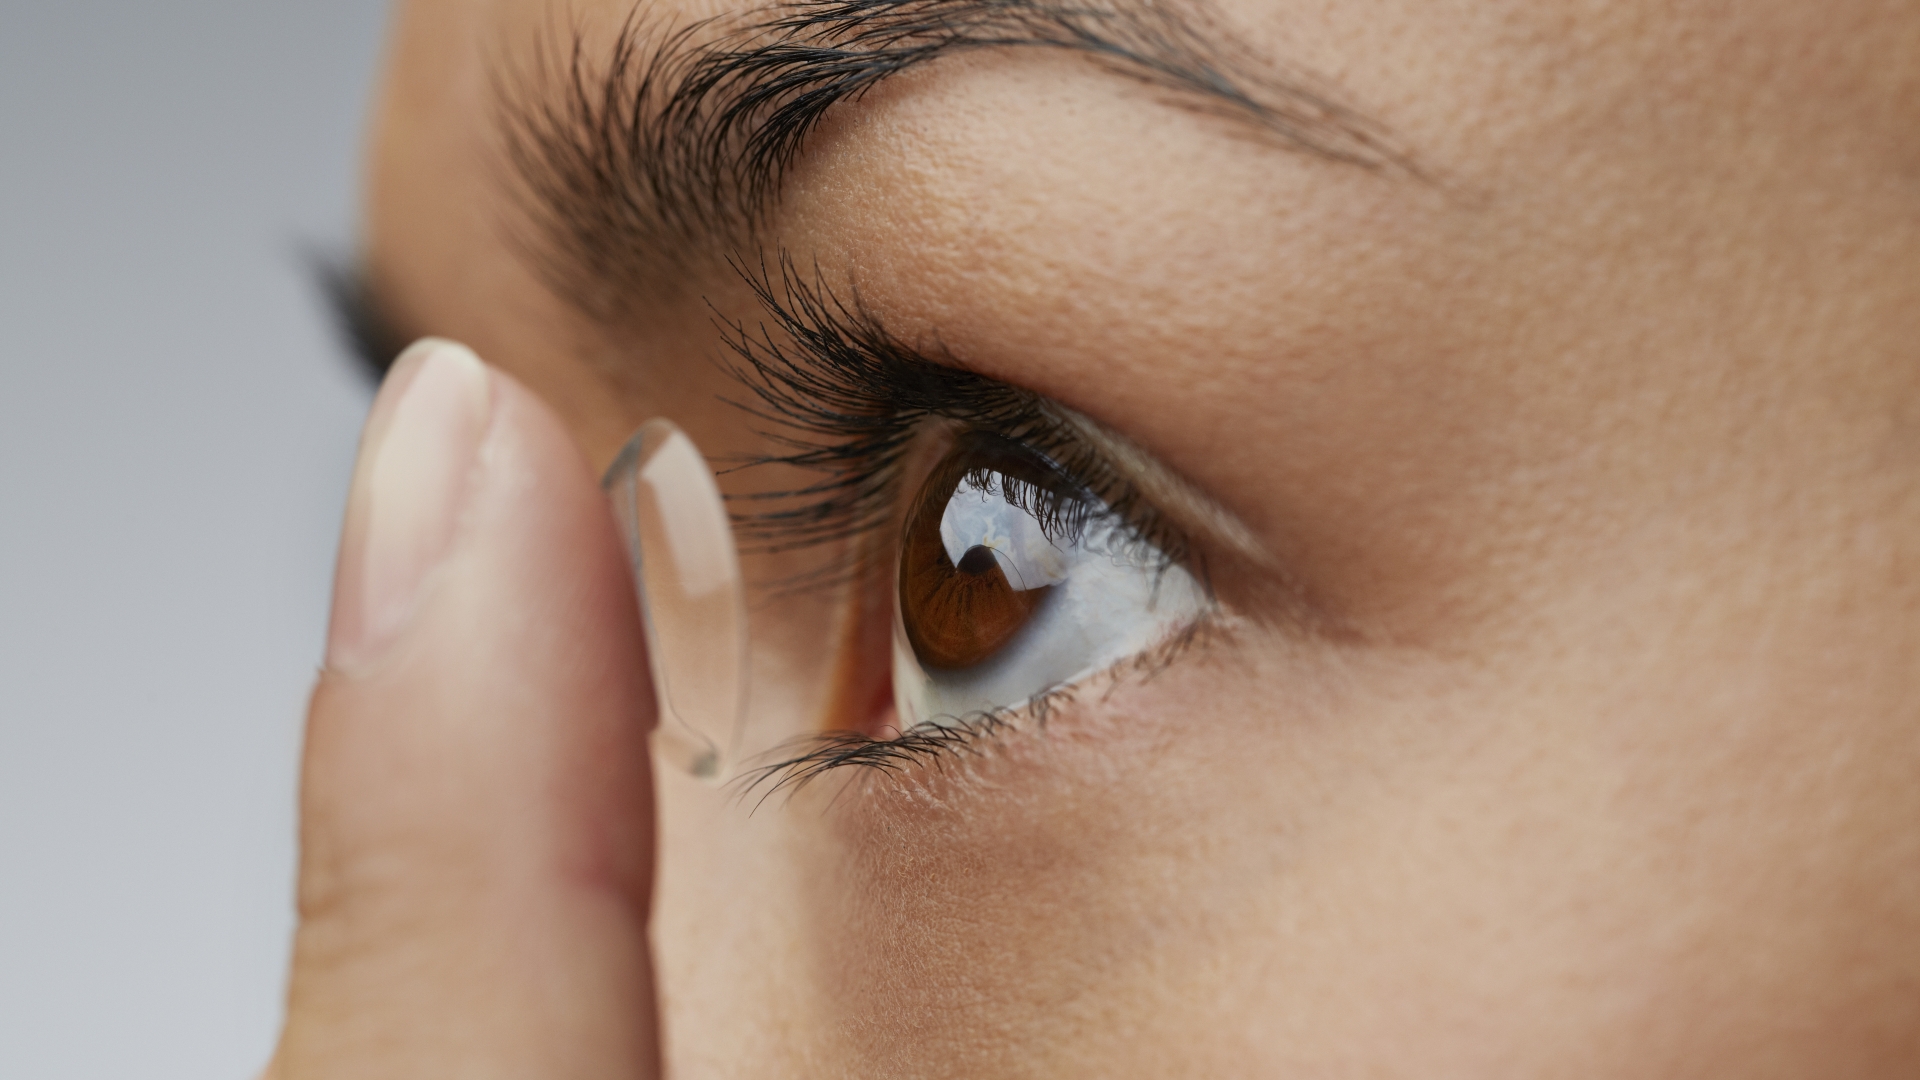 Urgent warning to anyone wearing contact lenses over risk of dangerous infection